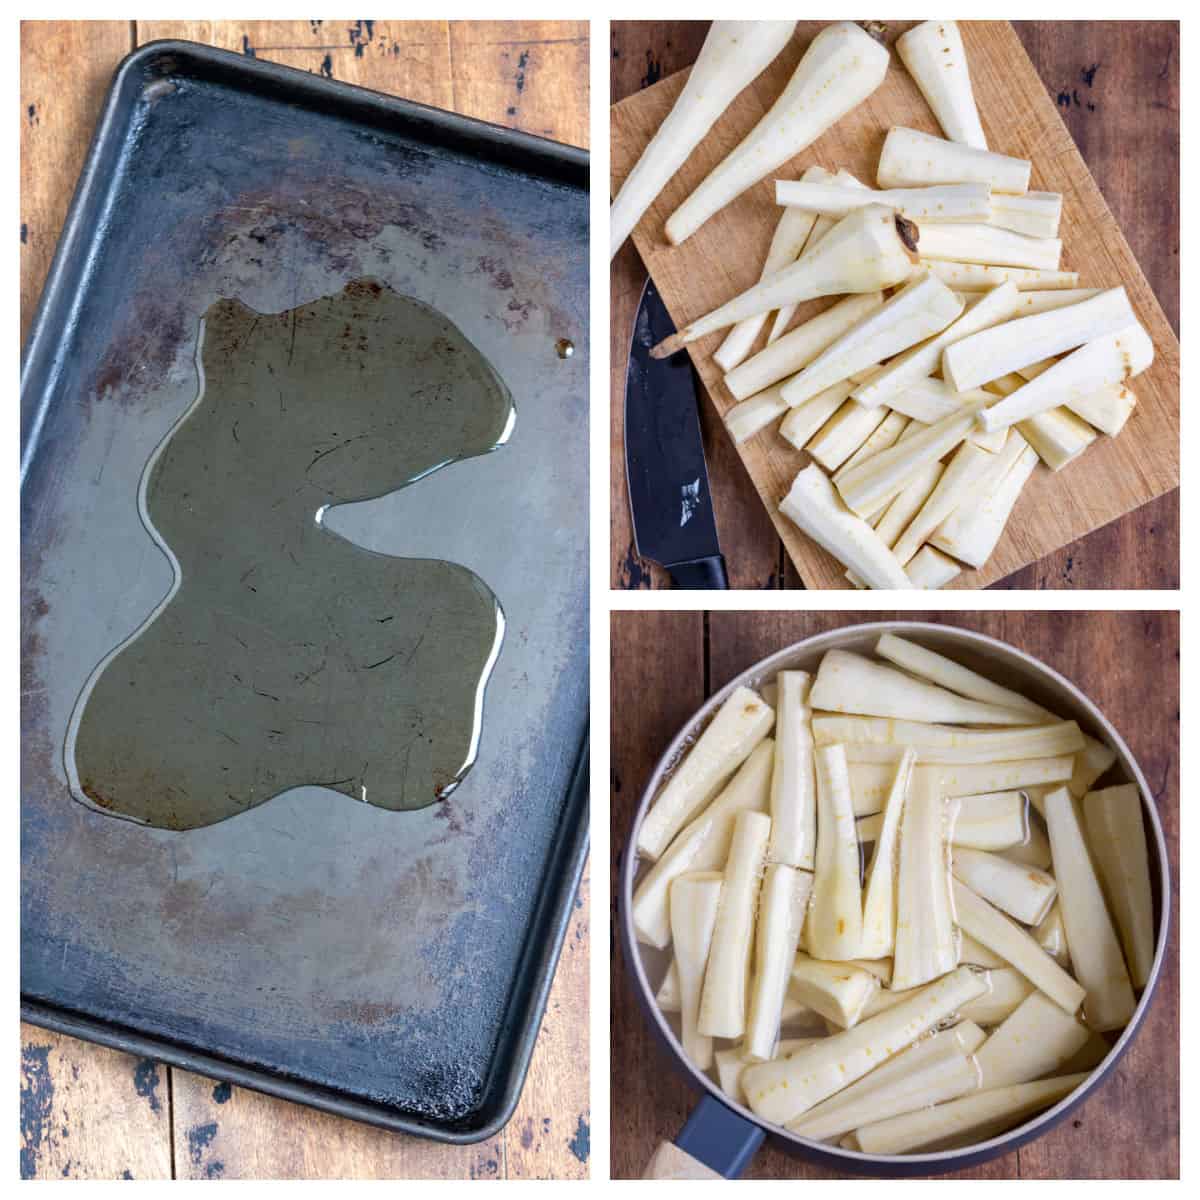 Baking sheet with oil, cutting parsnips, boiling parsnips.